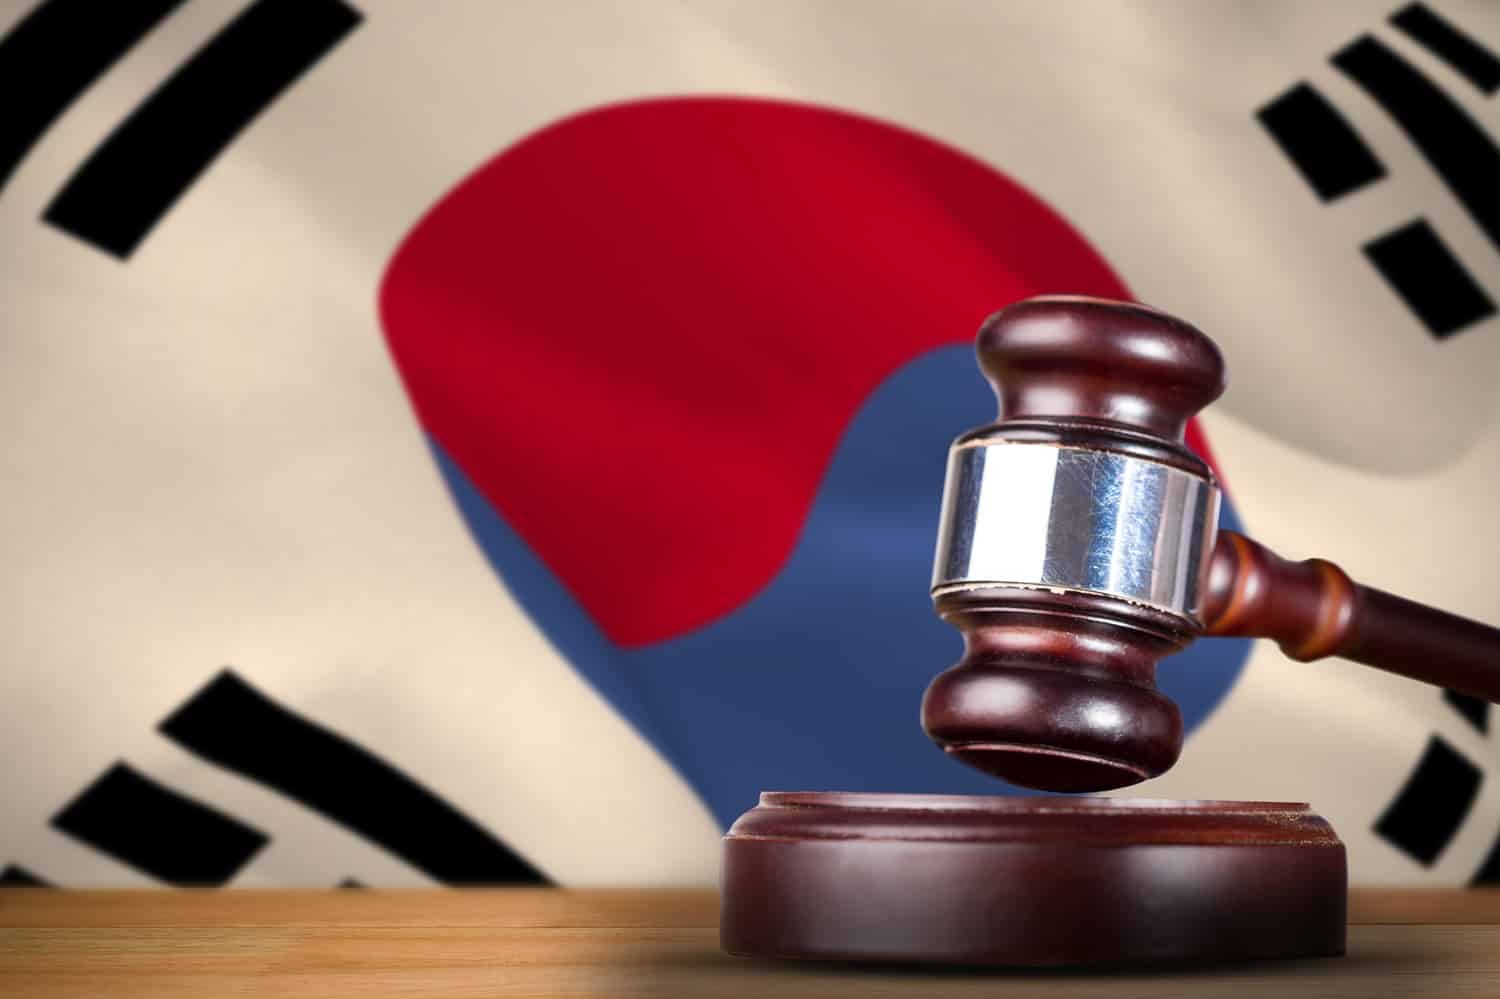 A hammer and gavel on a table in front of the South Korean flag.